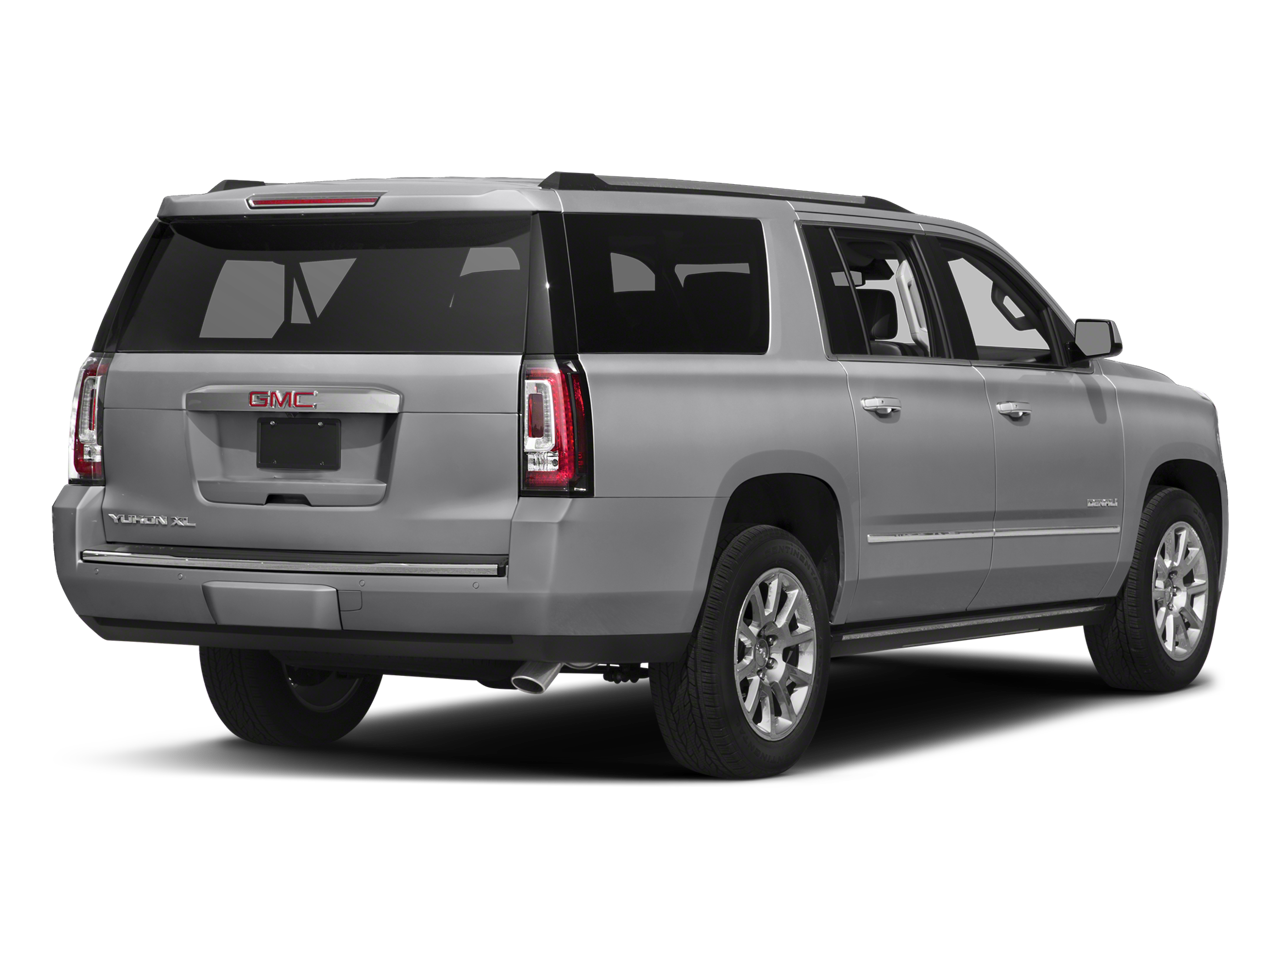 Used 2018 GMC Yukon XL Denali with VIN 1GKS2HKJ3JR102269 for sale in Westbrook, ME